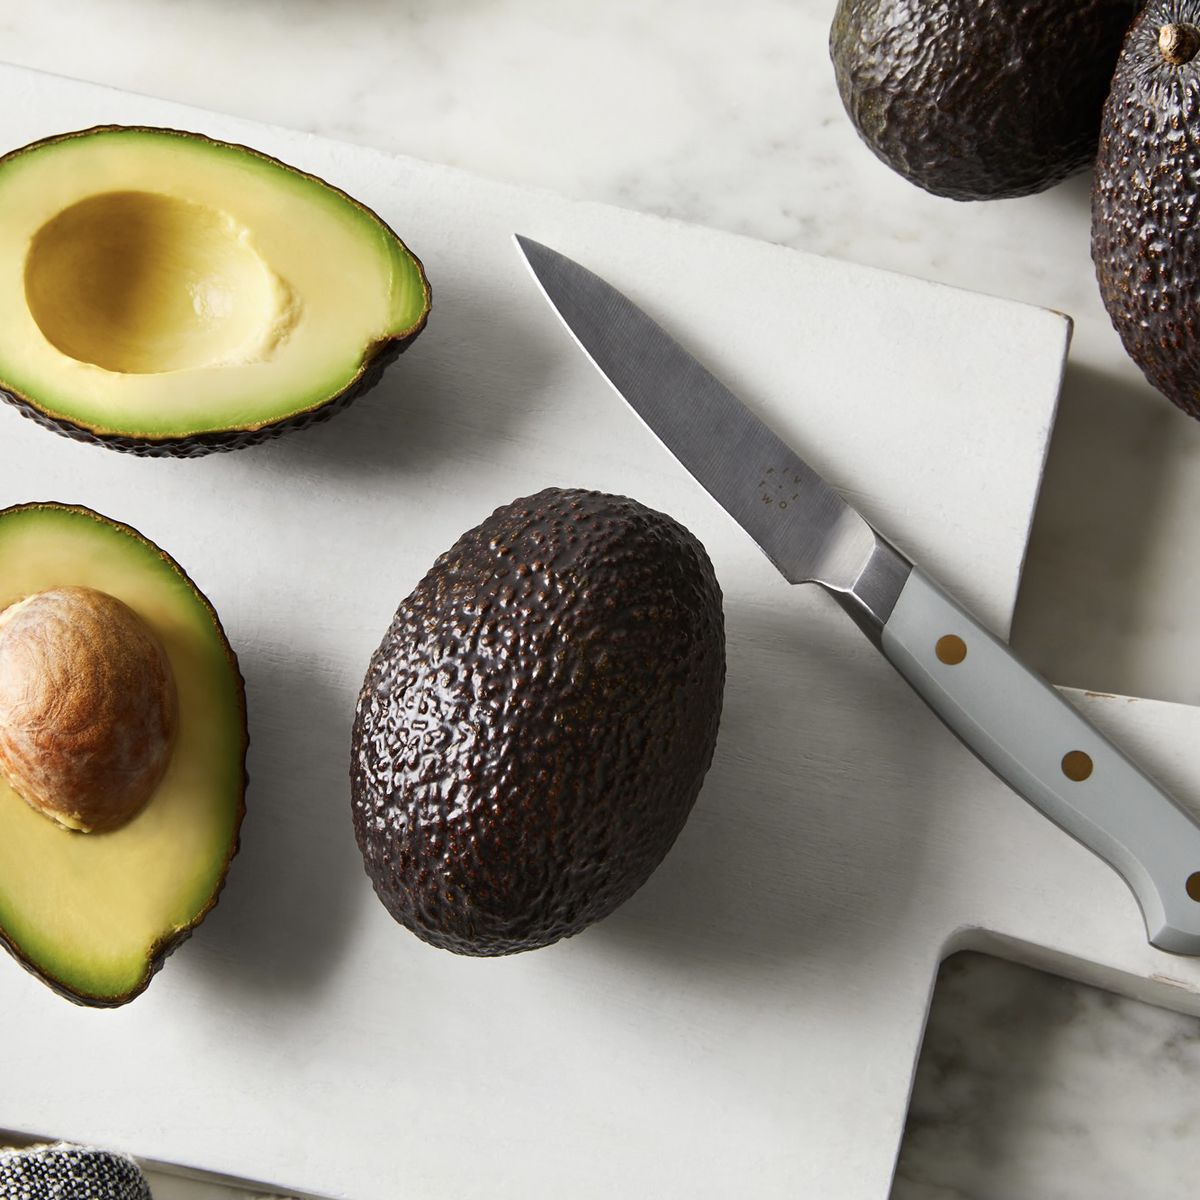 How to Store Avocados — Whole and Cut